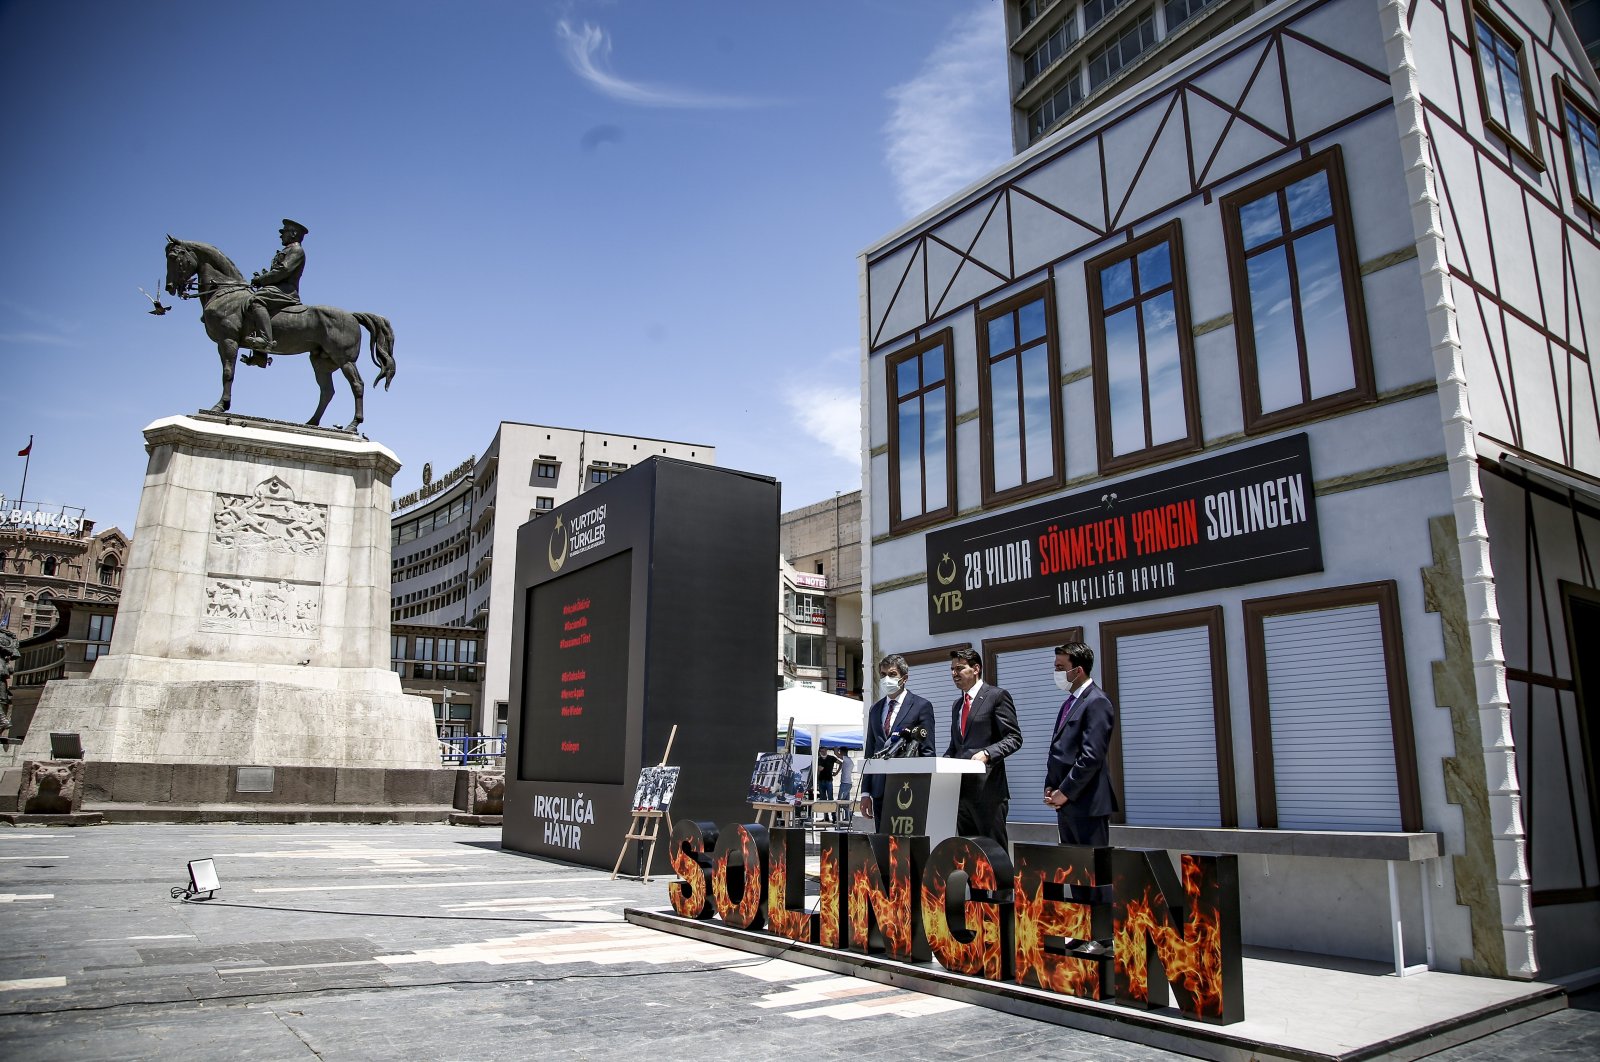 Abdullah Eren speaks at an event in front of the Solingen replica house in the capital, Ankara, Turkey, May 28, 2021. (İHA PHOTO)